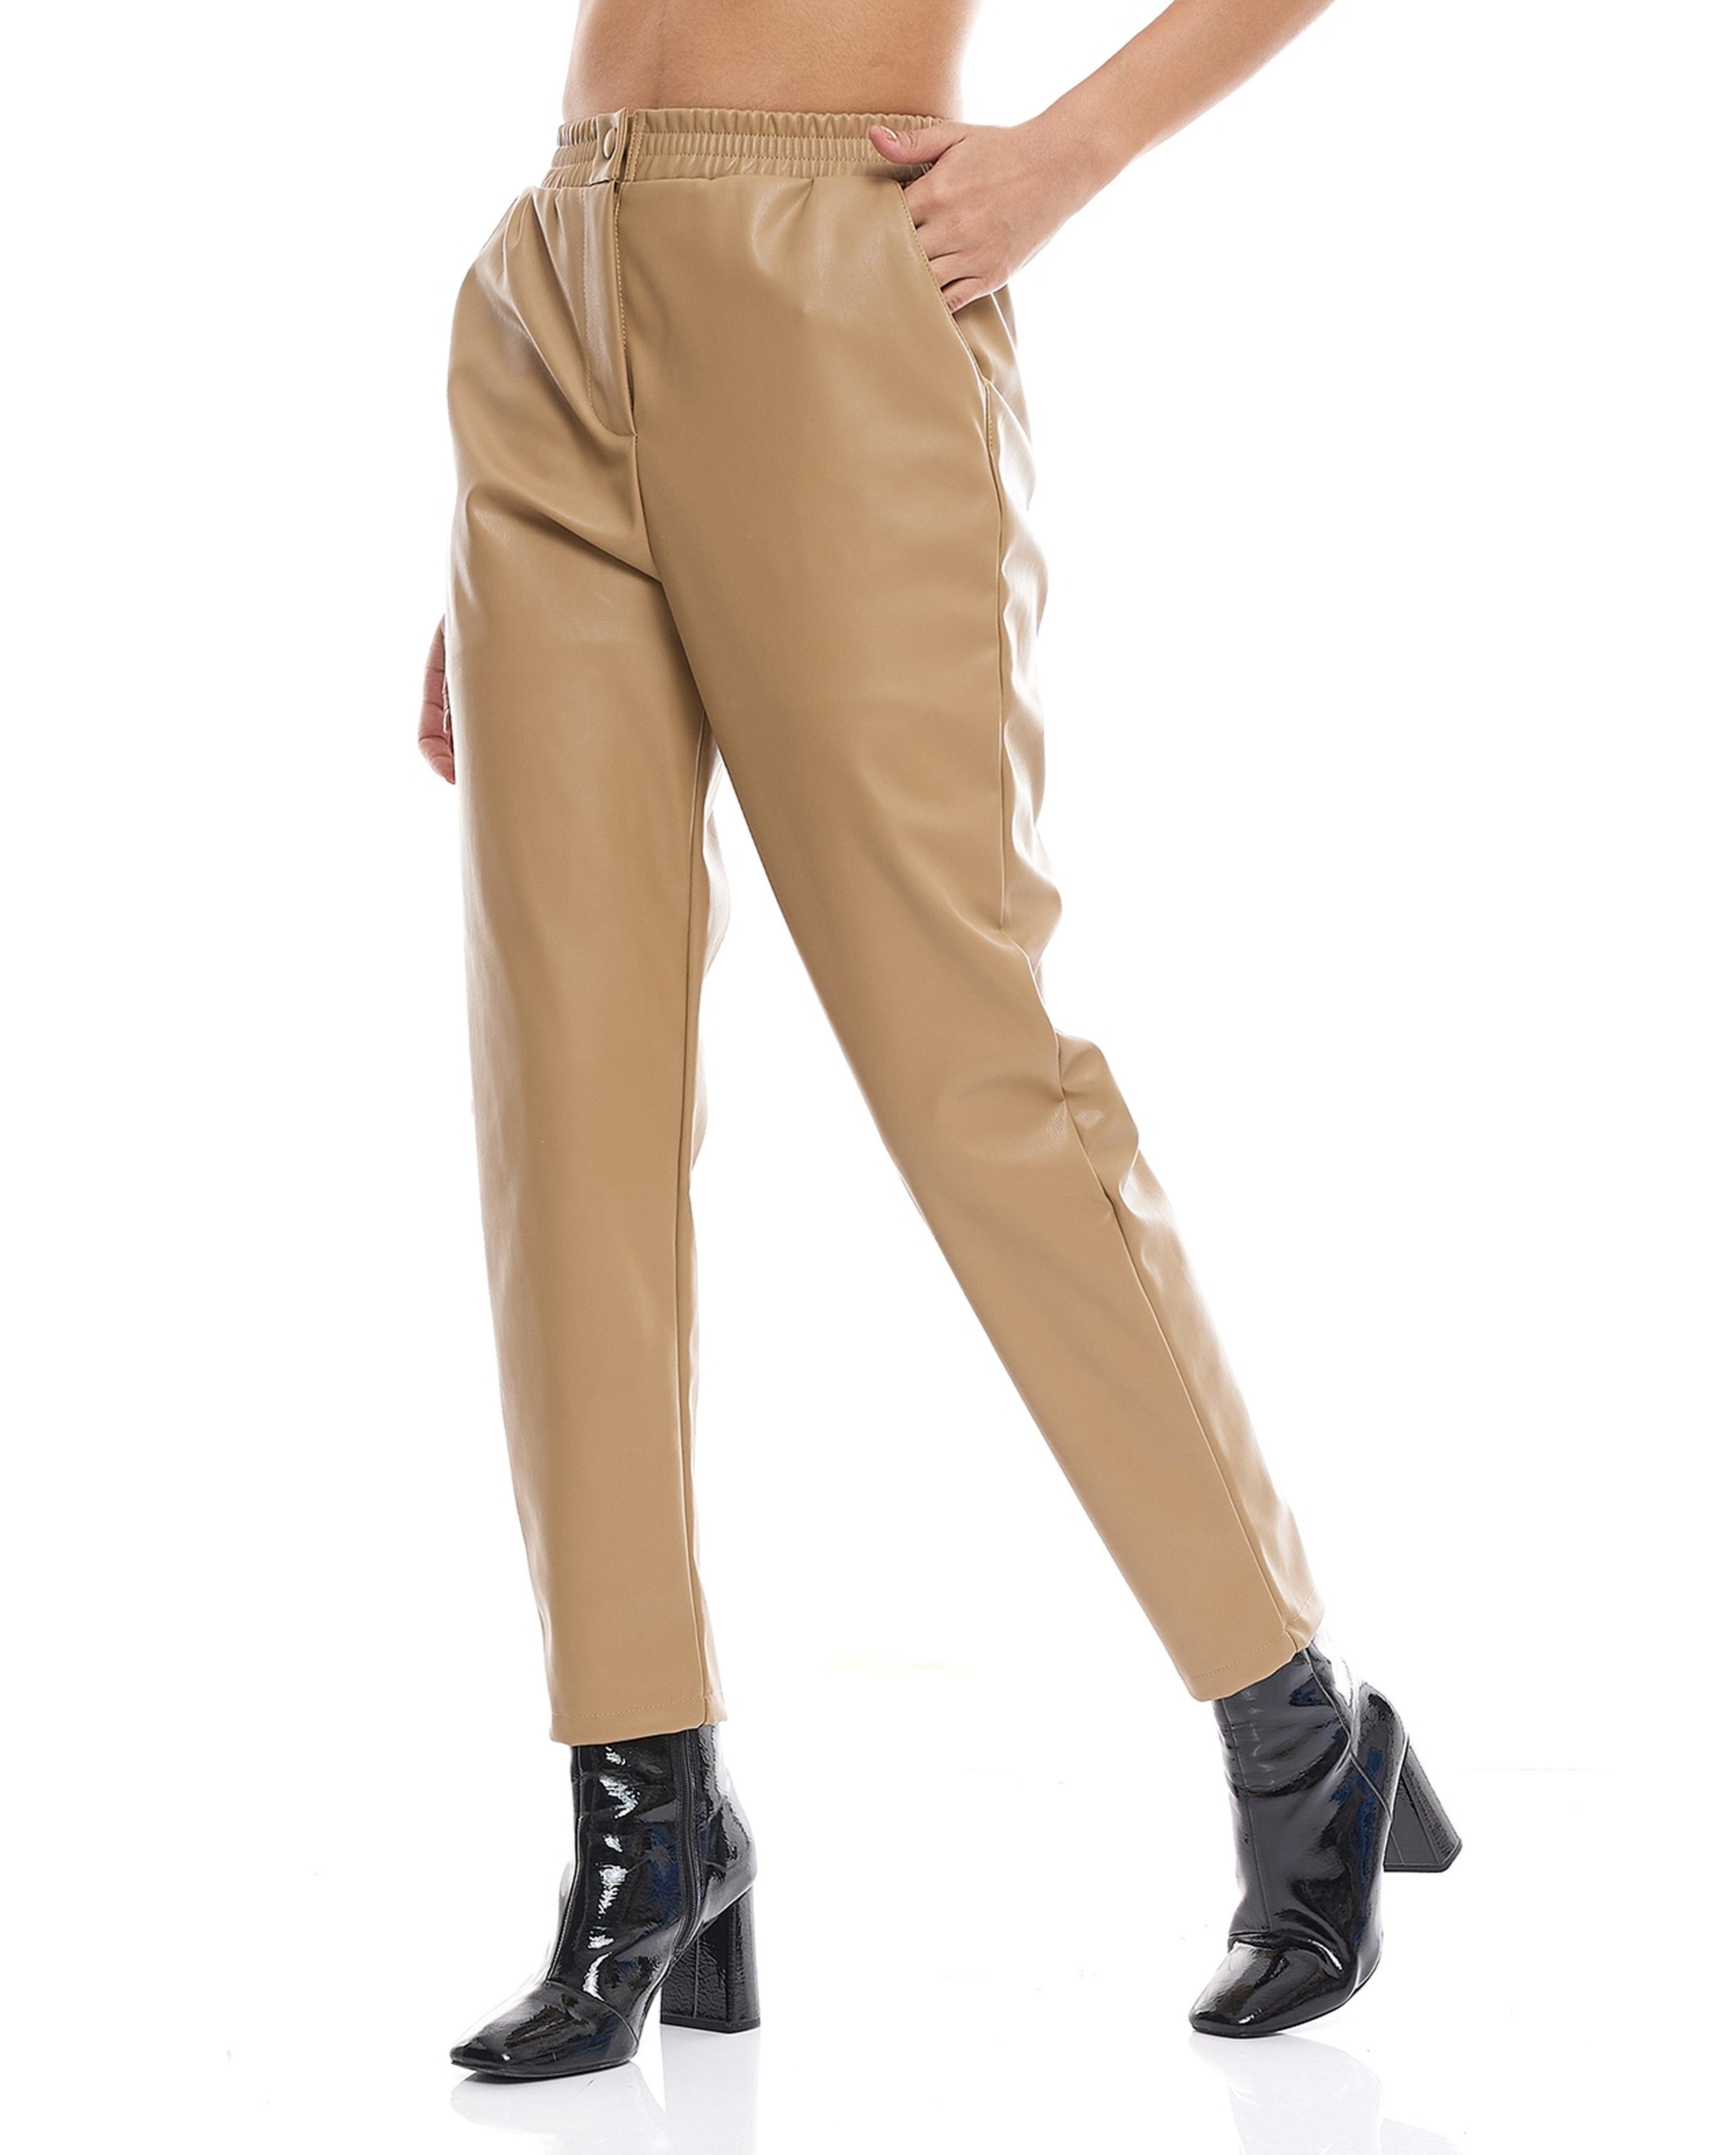 Solid Tapered pants with Button Closure